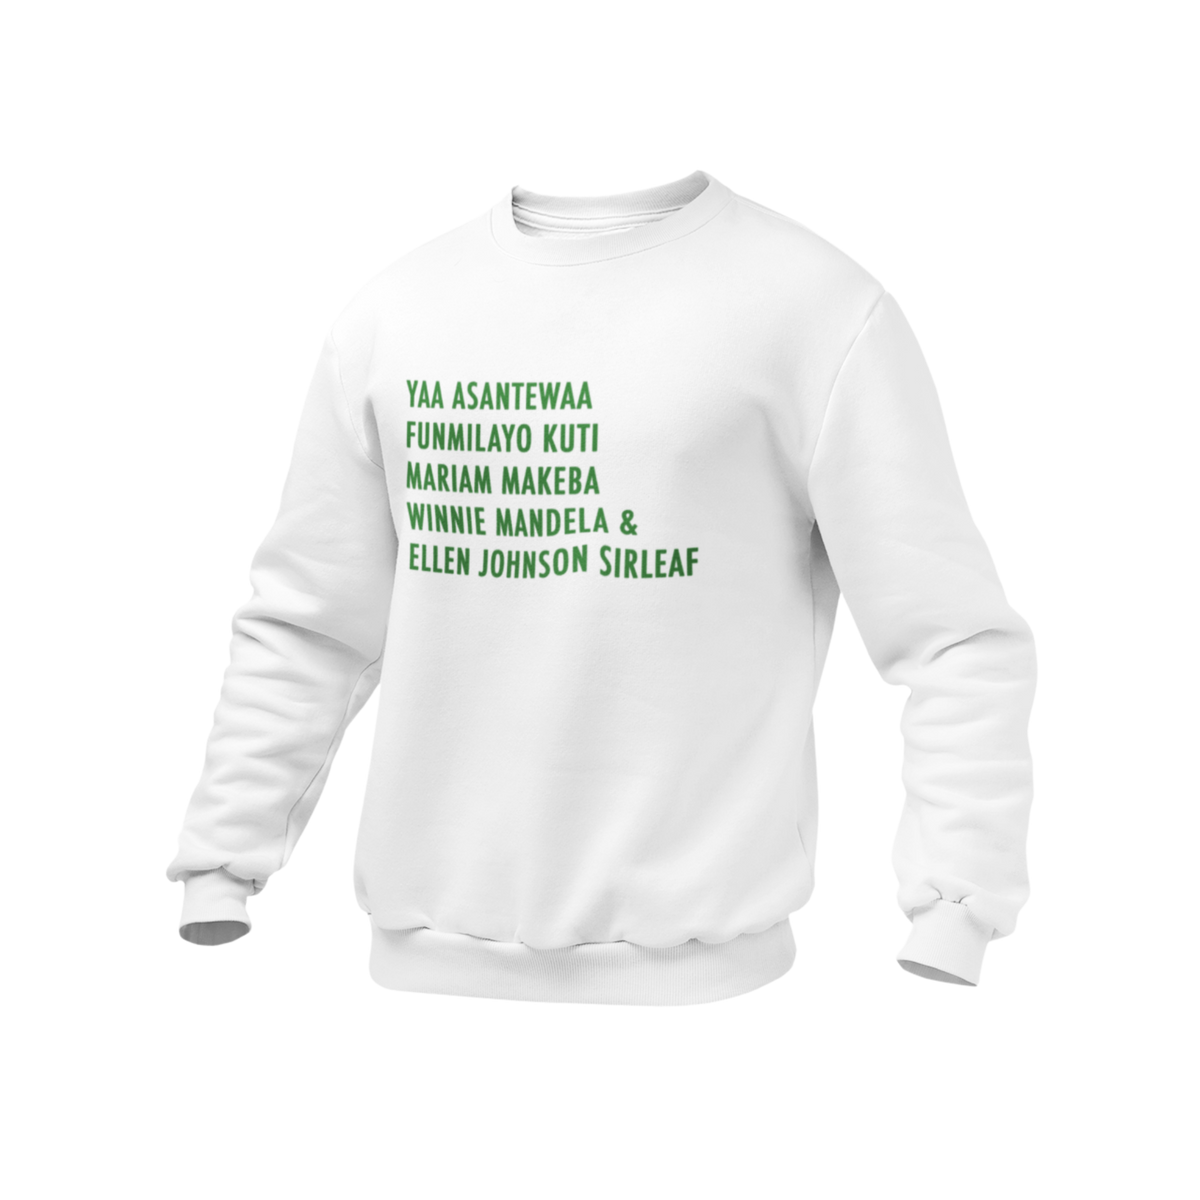 FREEDOM FIGHTERS WHITE SWEATER - Royal Dynamite #color_WHITE & GREEN